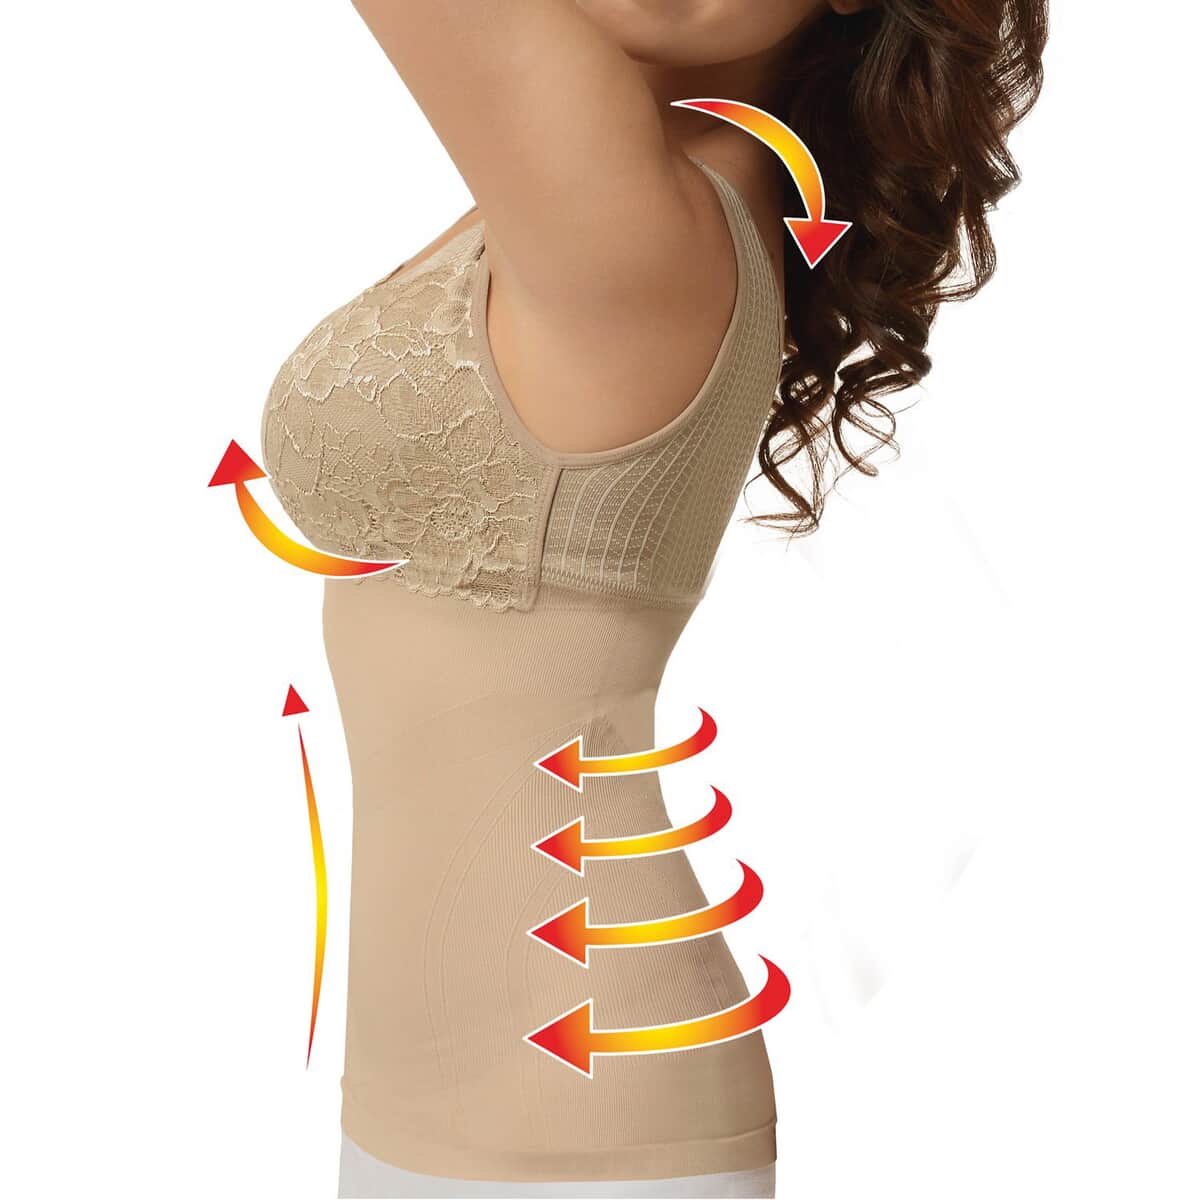 Buy Sankom Patent Shaping Camisole with Bra with Cooling Fibers